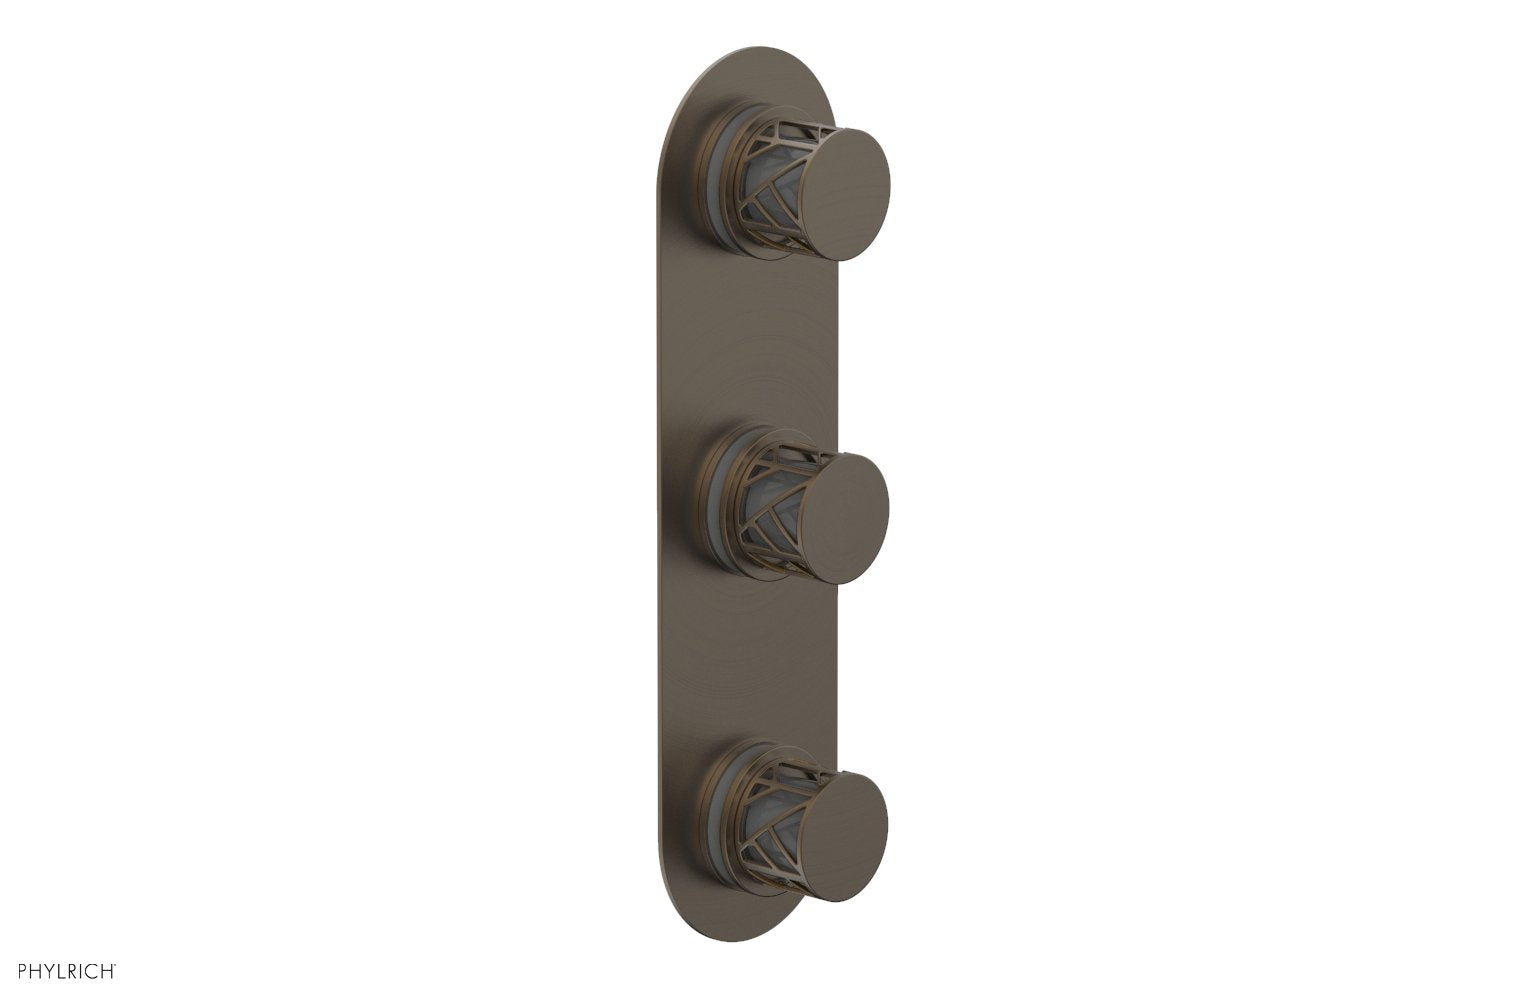 Phylrich JOLIE Thermostatic Valve with Two Volume Control with "Grey" Accents